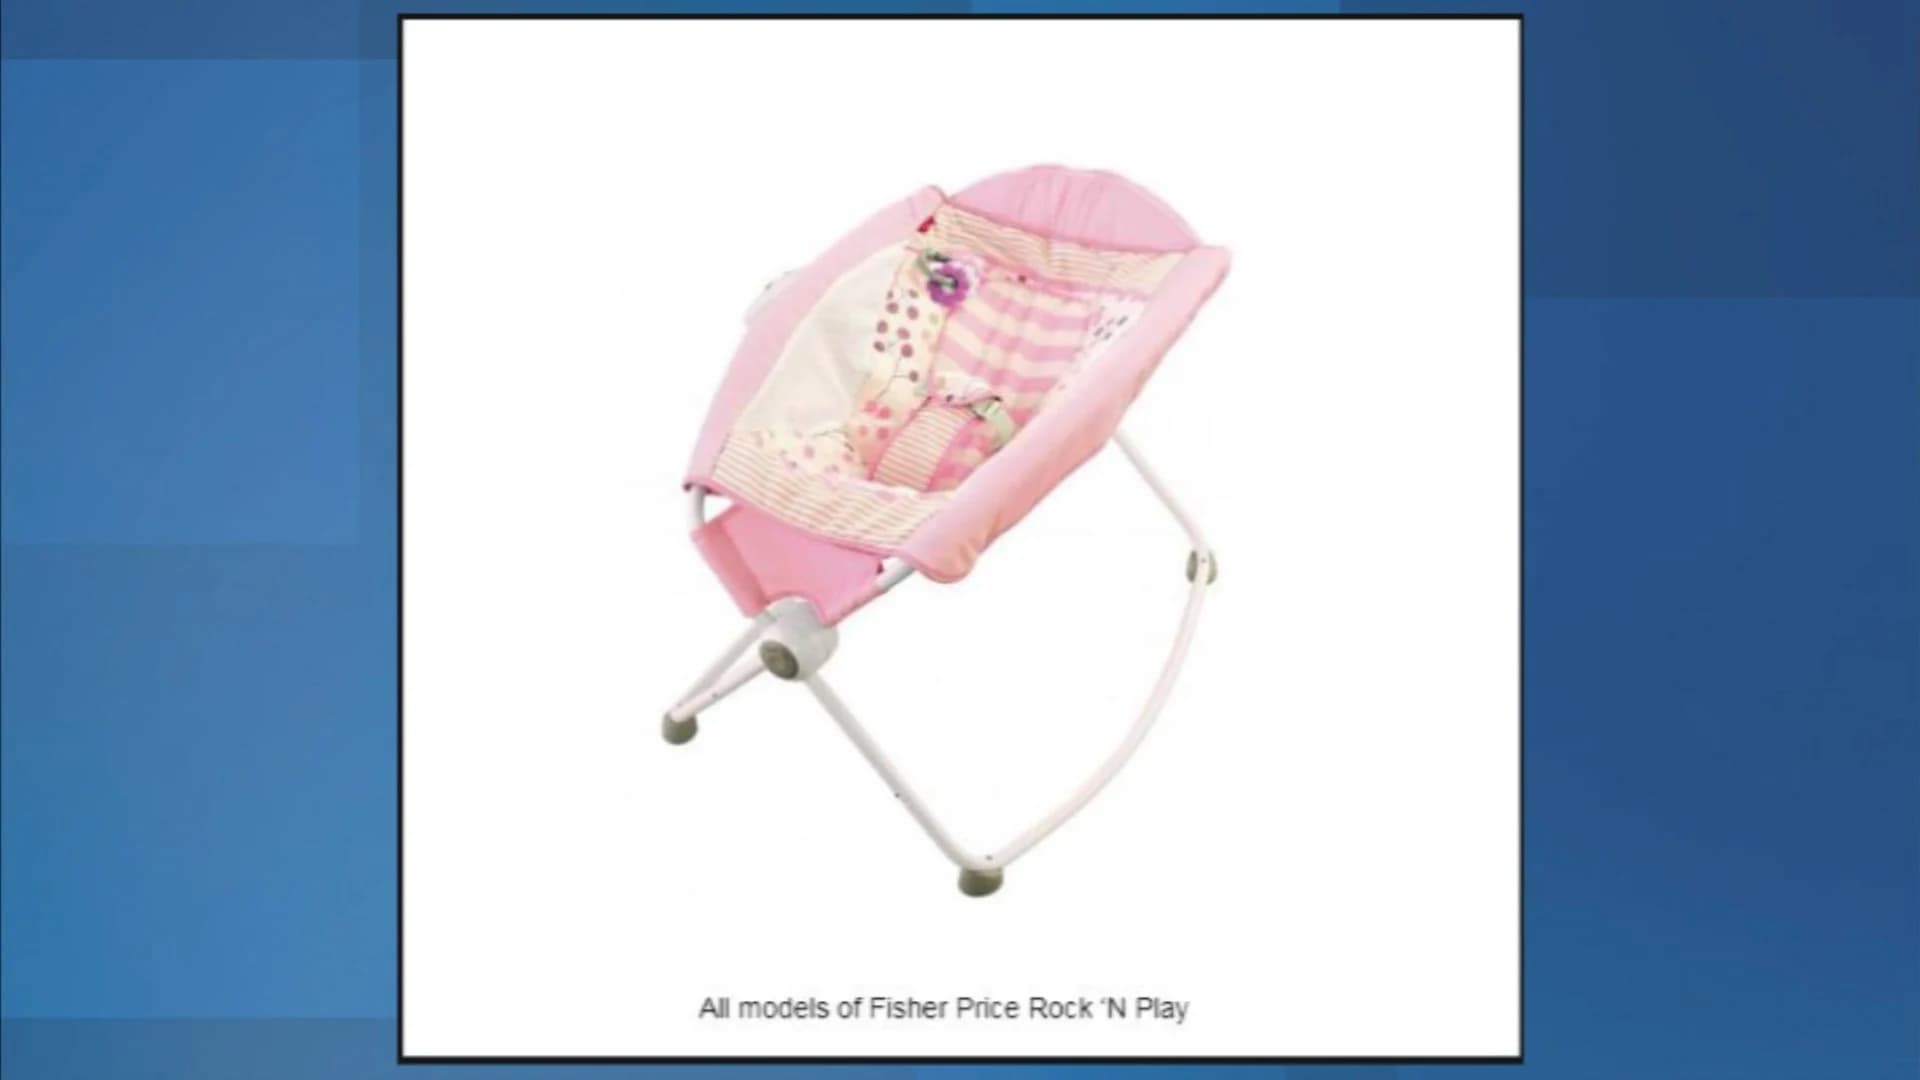 Officials issue warning on Fisher-Price baby rocker amid reports of deaths